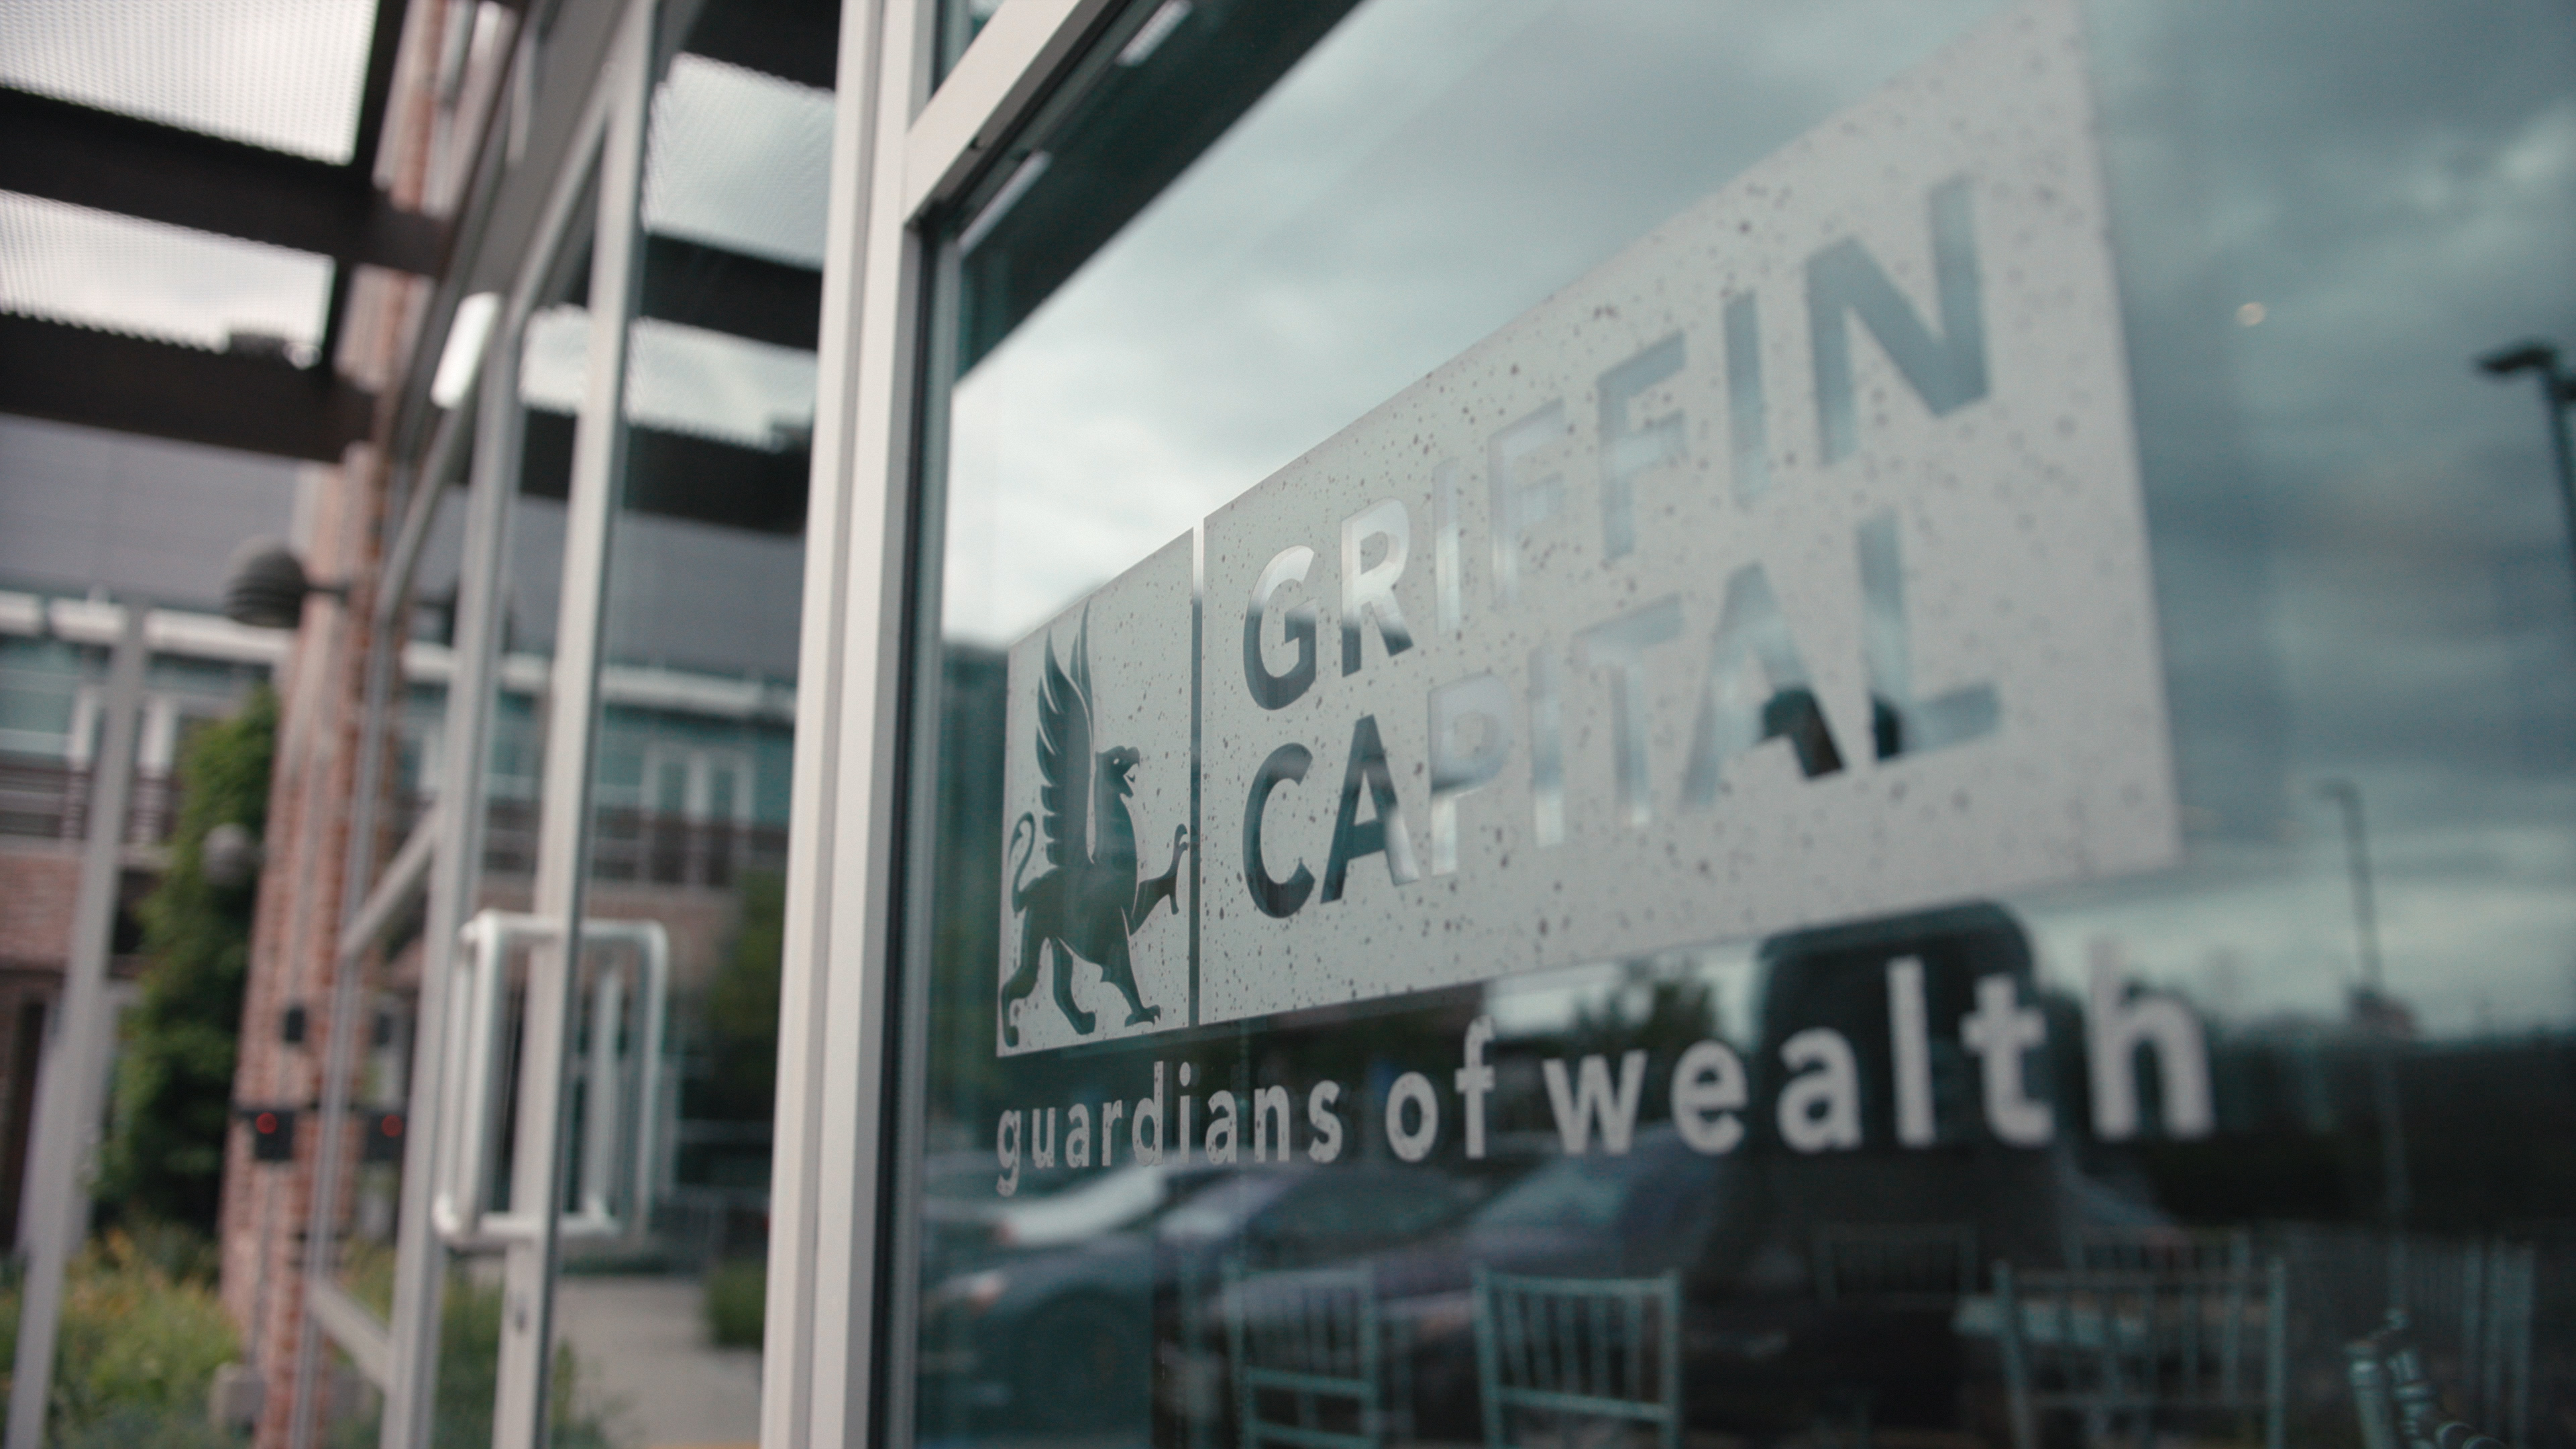 Sponsored: Griffin Capital Securities Achieves Record Growth Across All Intermediary Distribution Channels